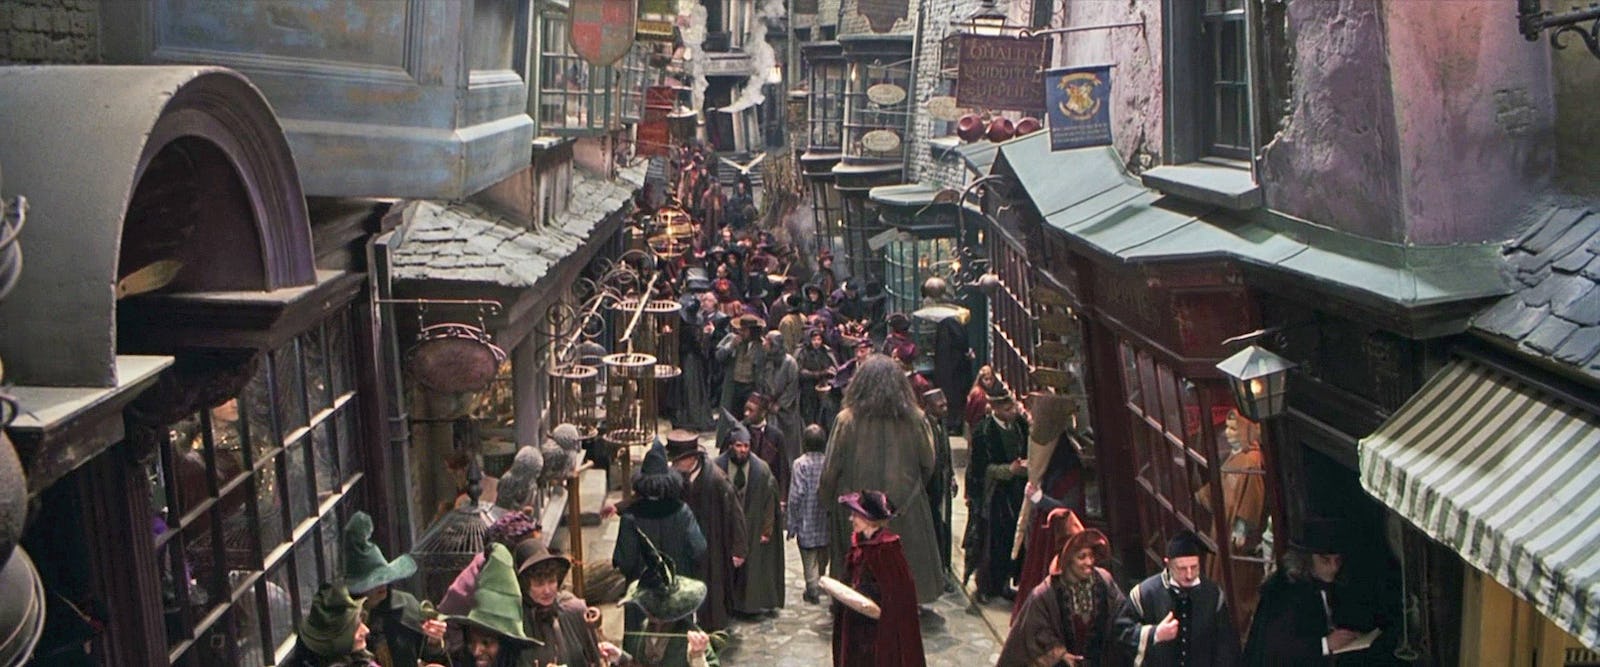 is-diagon-alley-a-real-place-how-to-visit-the-inspiration-for-harry-potter-s-best-marketplace